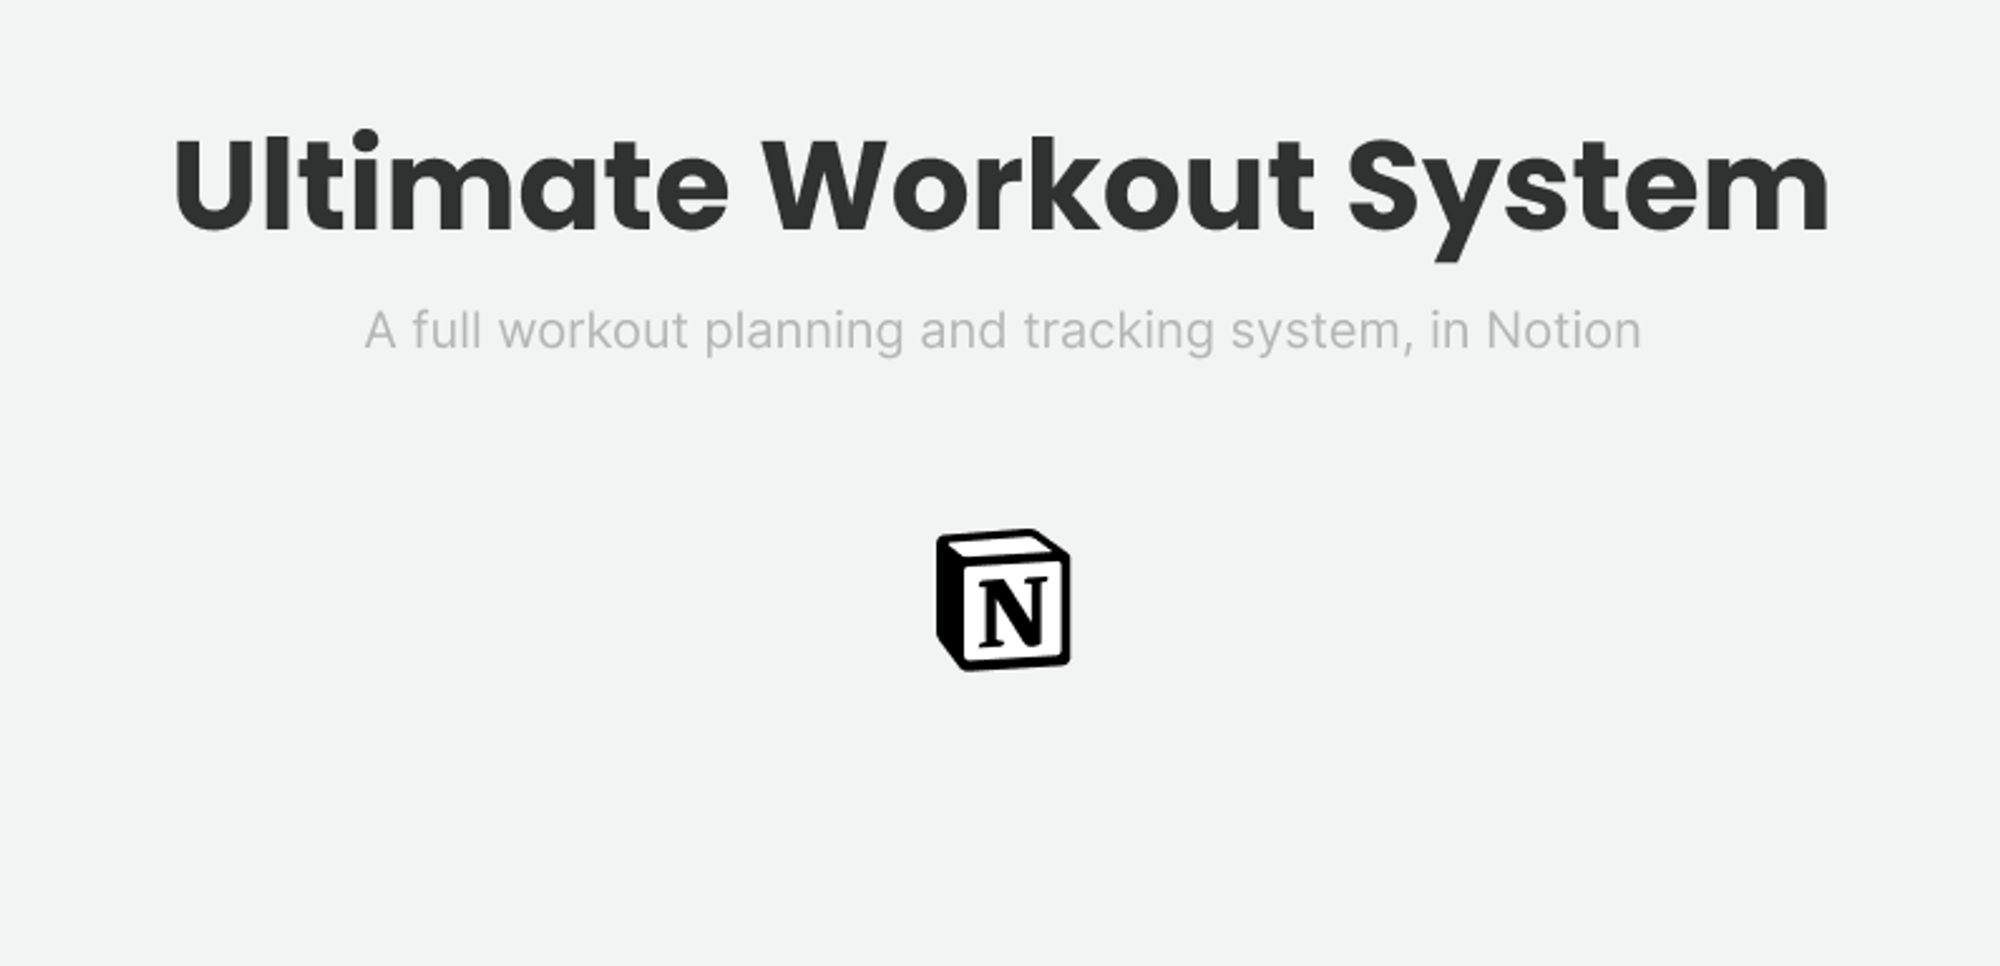 Ultimate Workout System